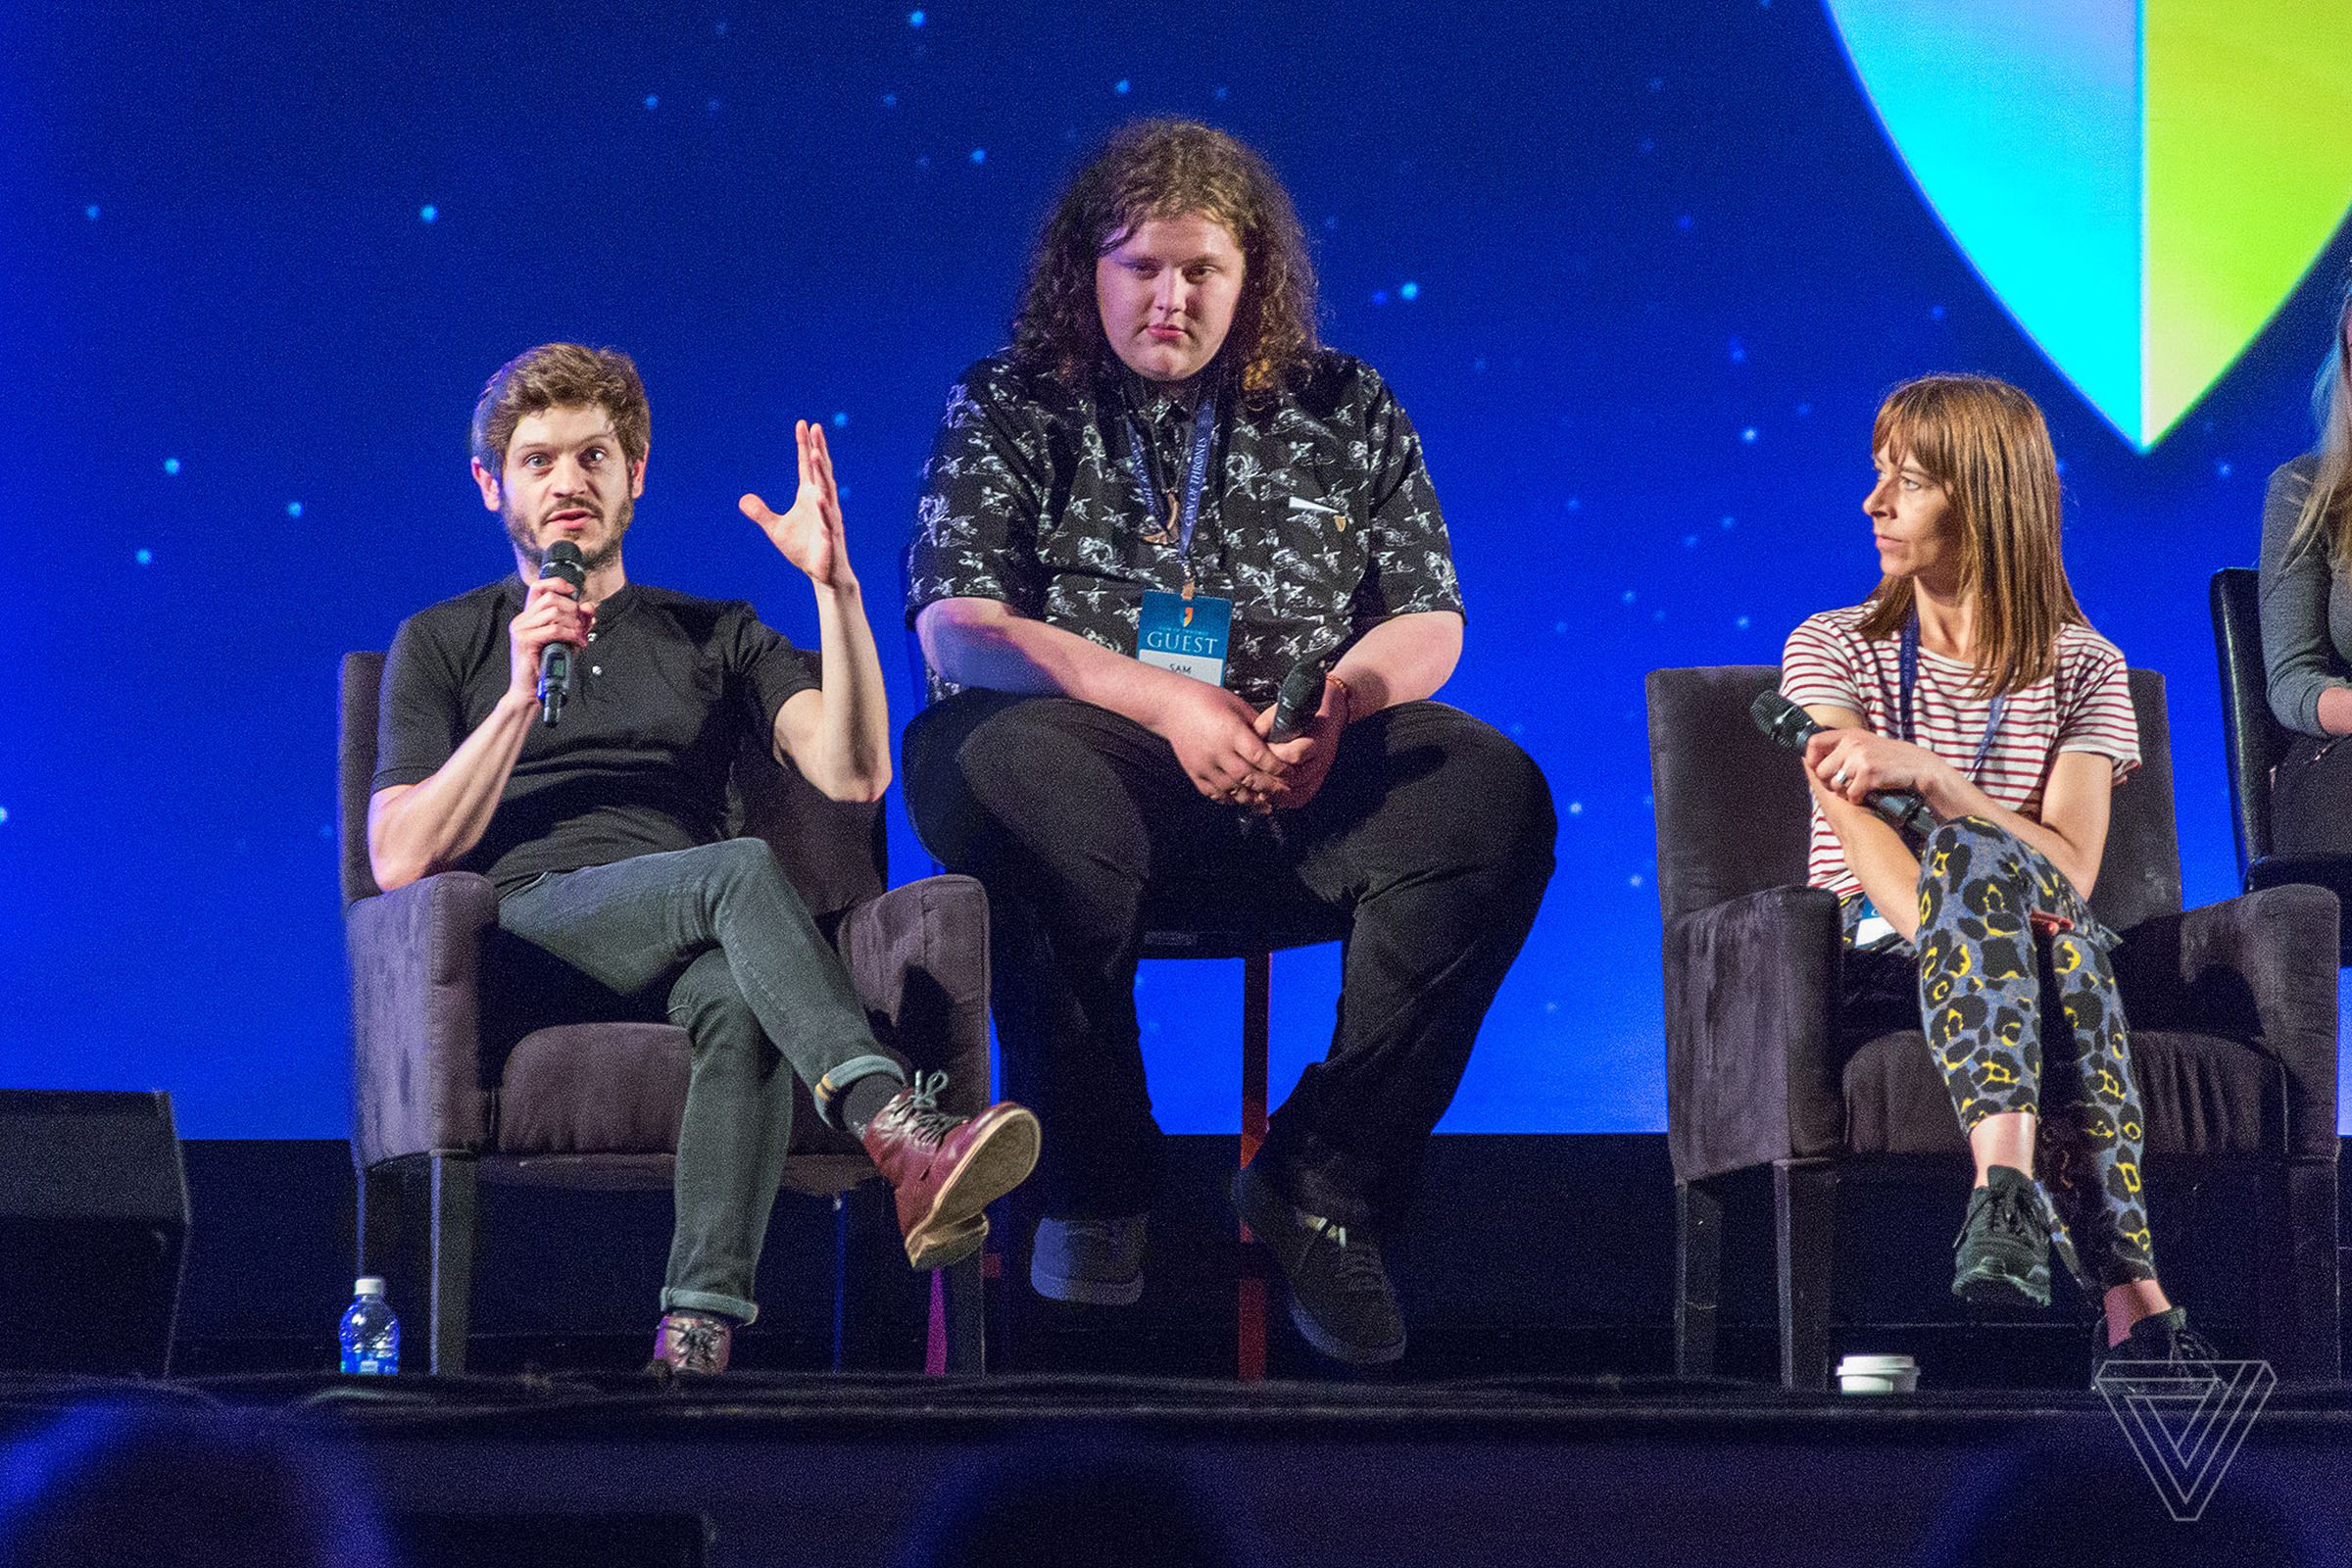 Iwan Rheon, Sam Coleman and Kate Dickie on the Dead Characters’ panel at Con of Thrones.